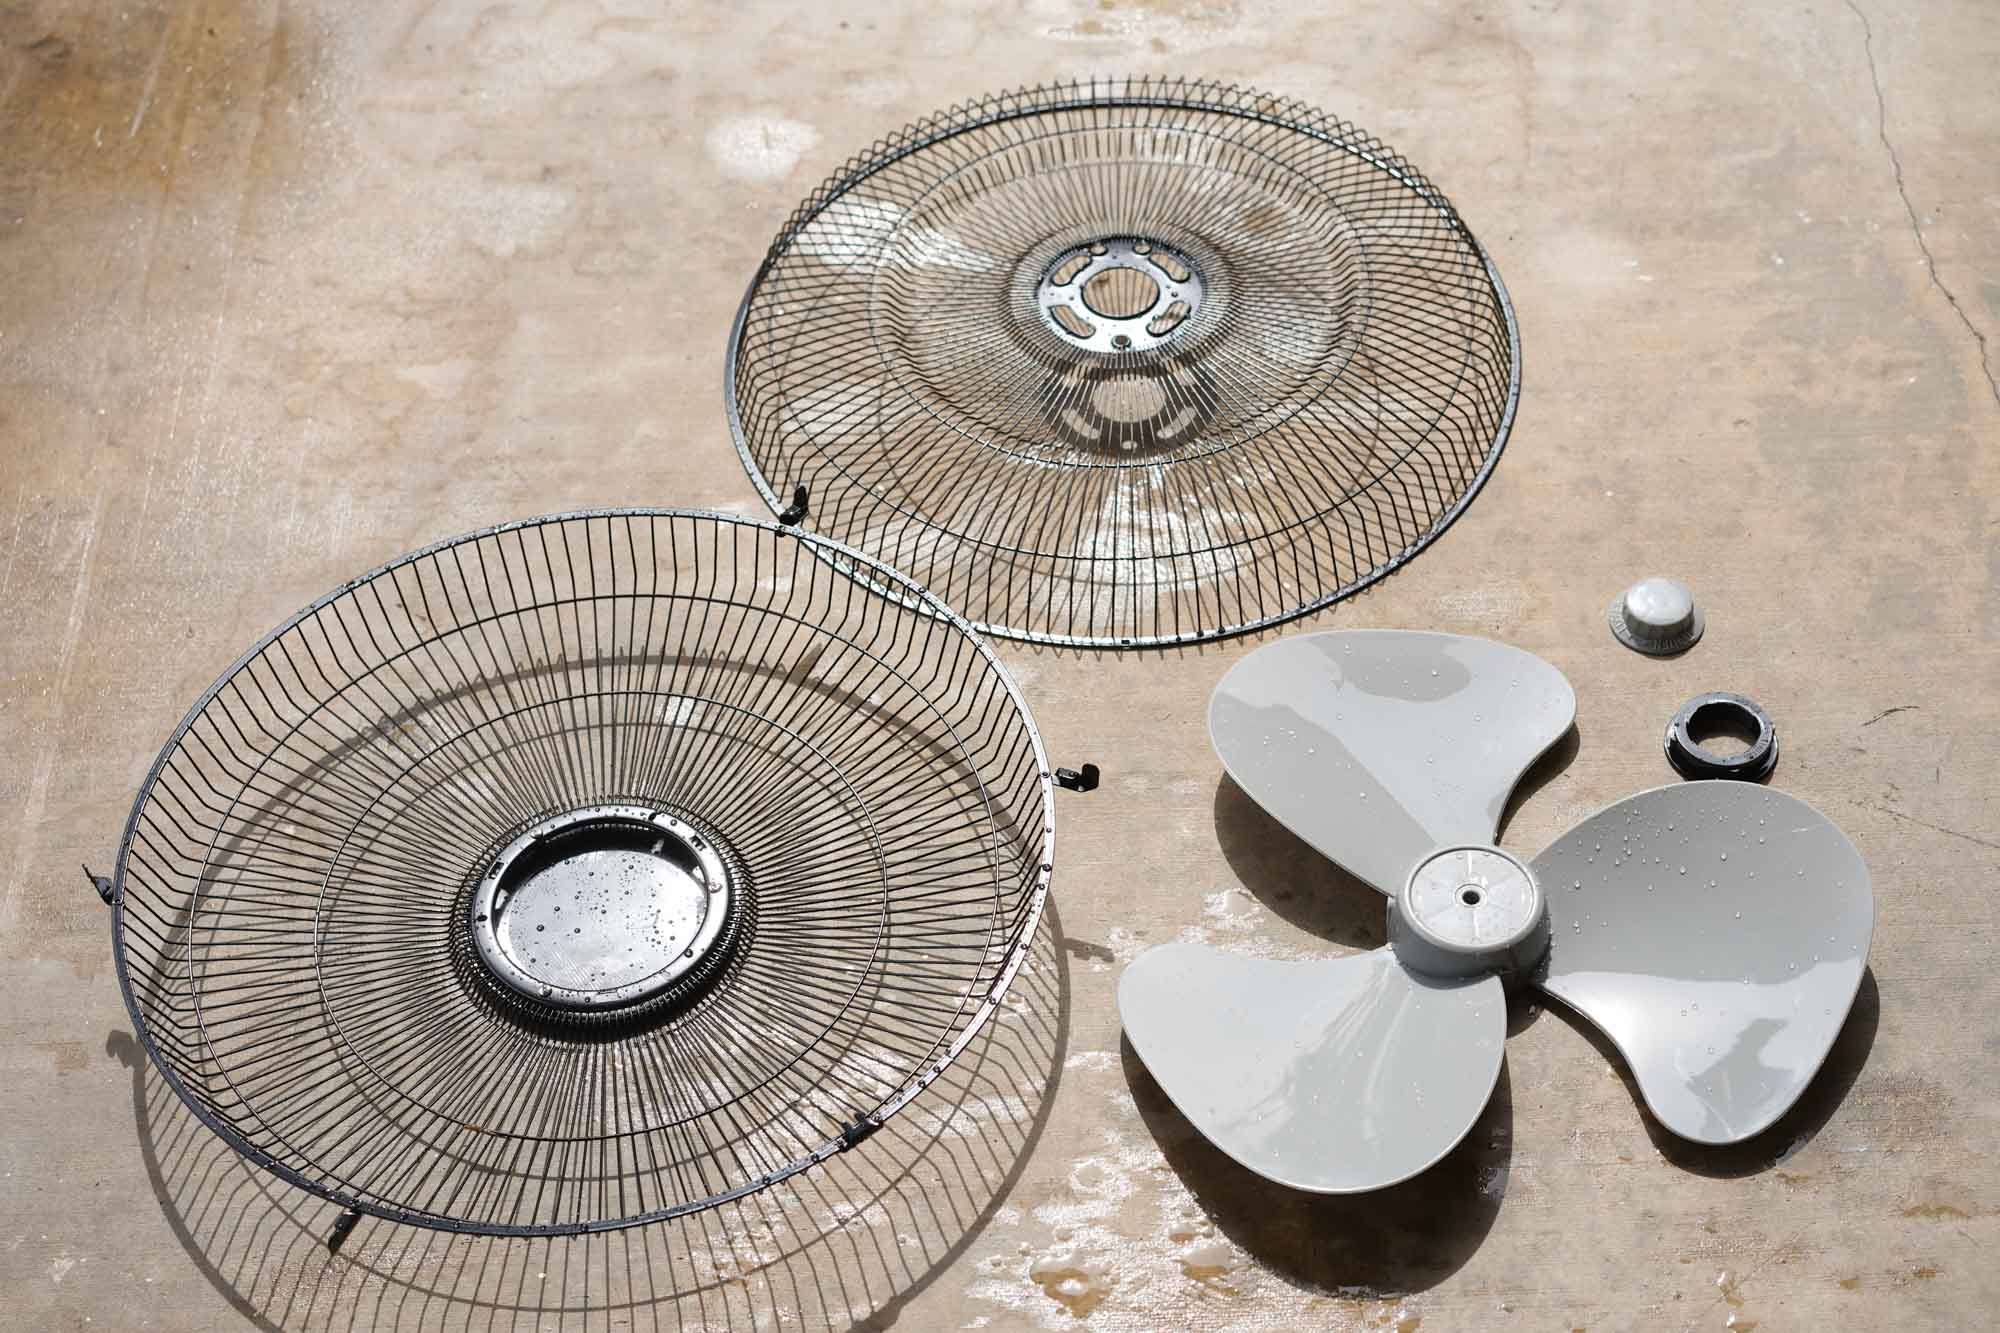 How to Clean a Tower Fan to Remove Dust and Debris